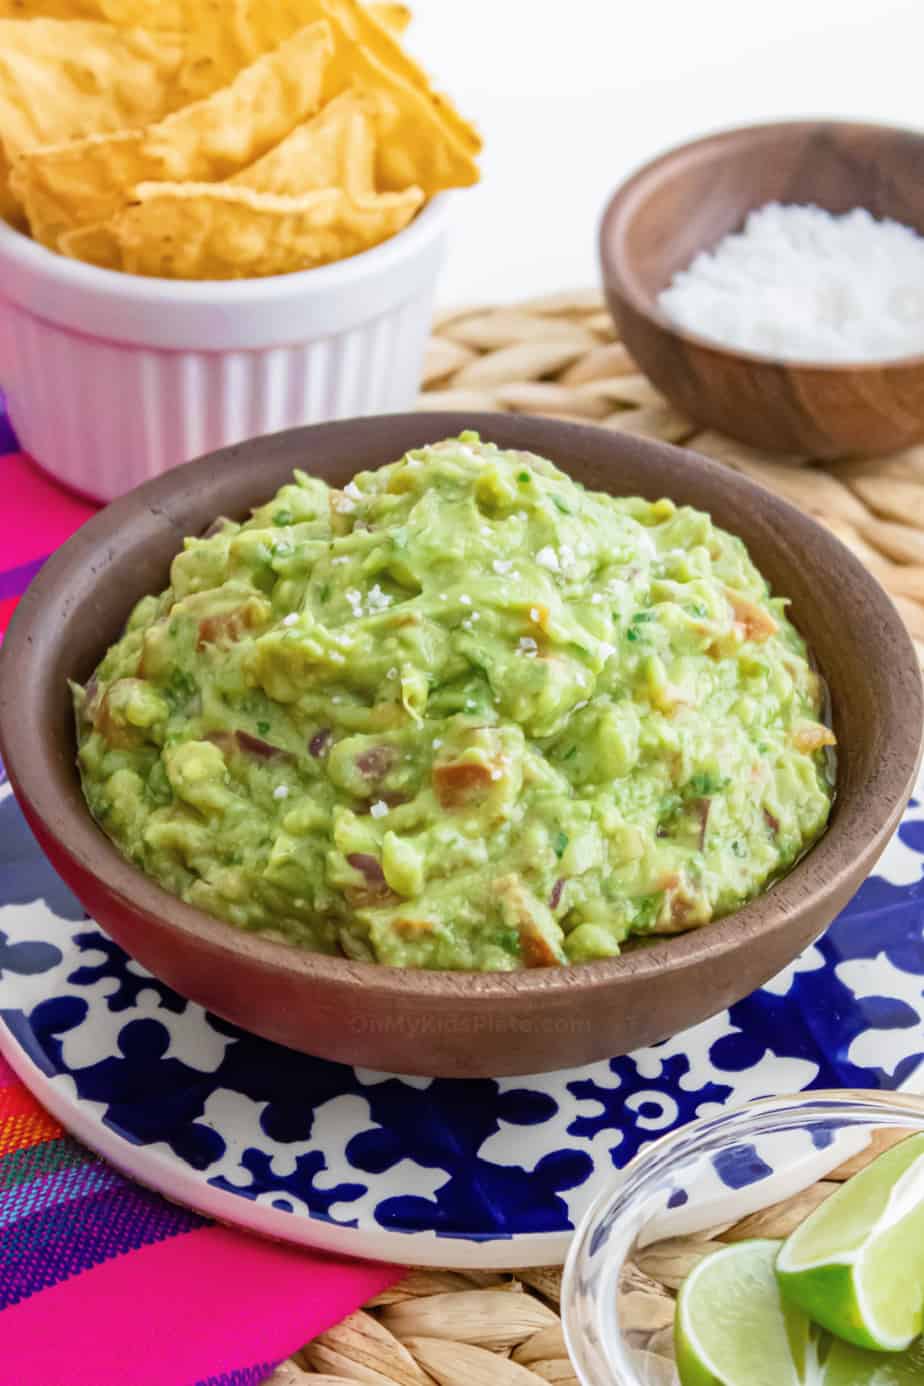 Guacamole in a wood bowl with small bowls of chips, salt and lime.